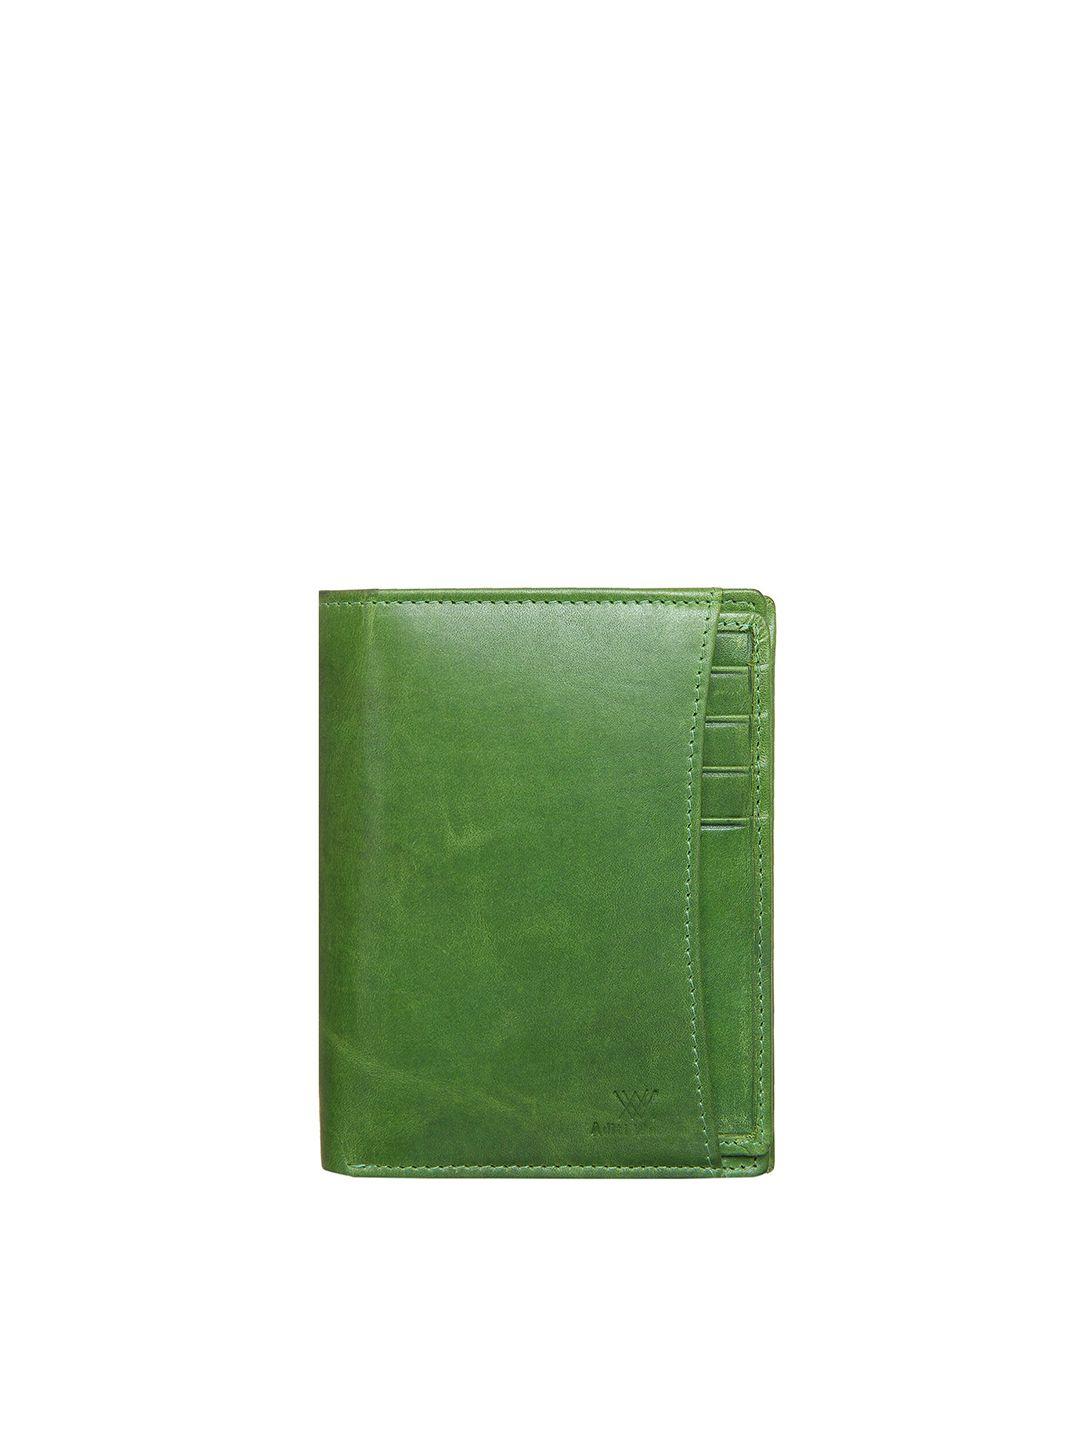 aditi wasan green solid leather two fold wallet